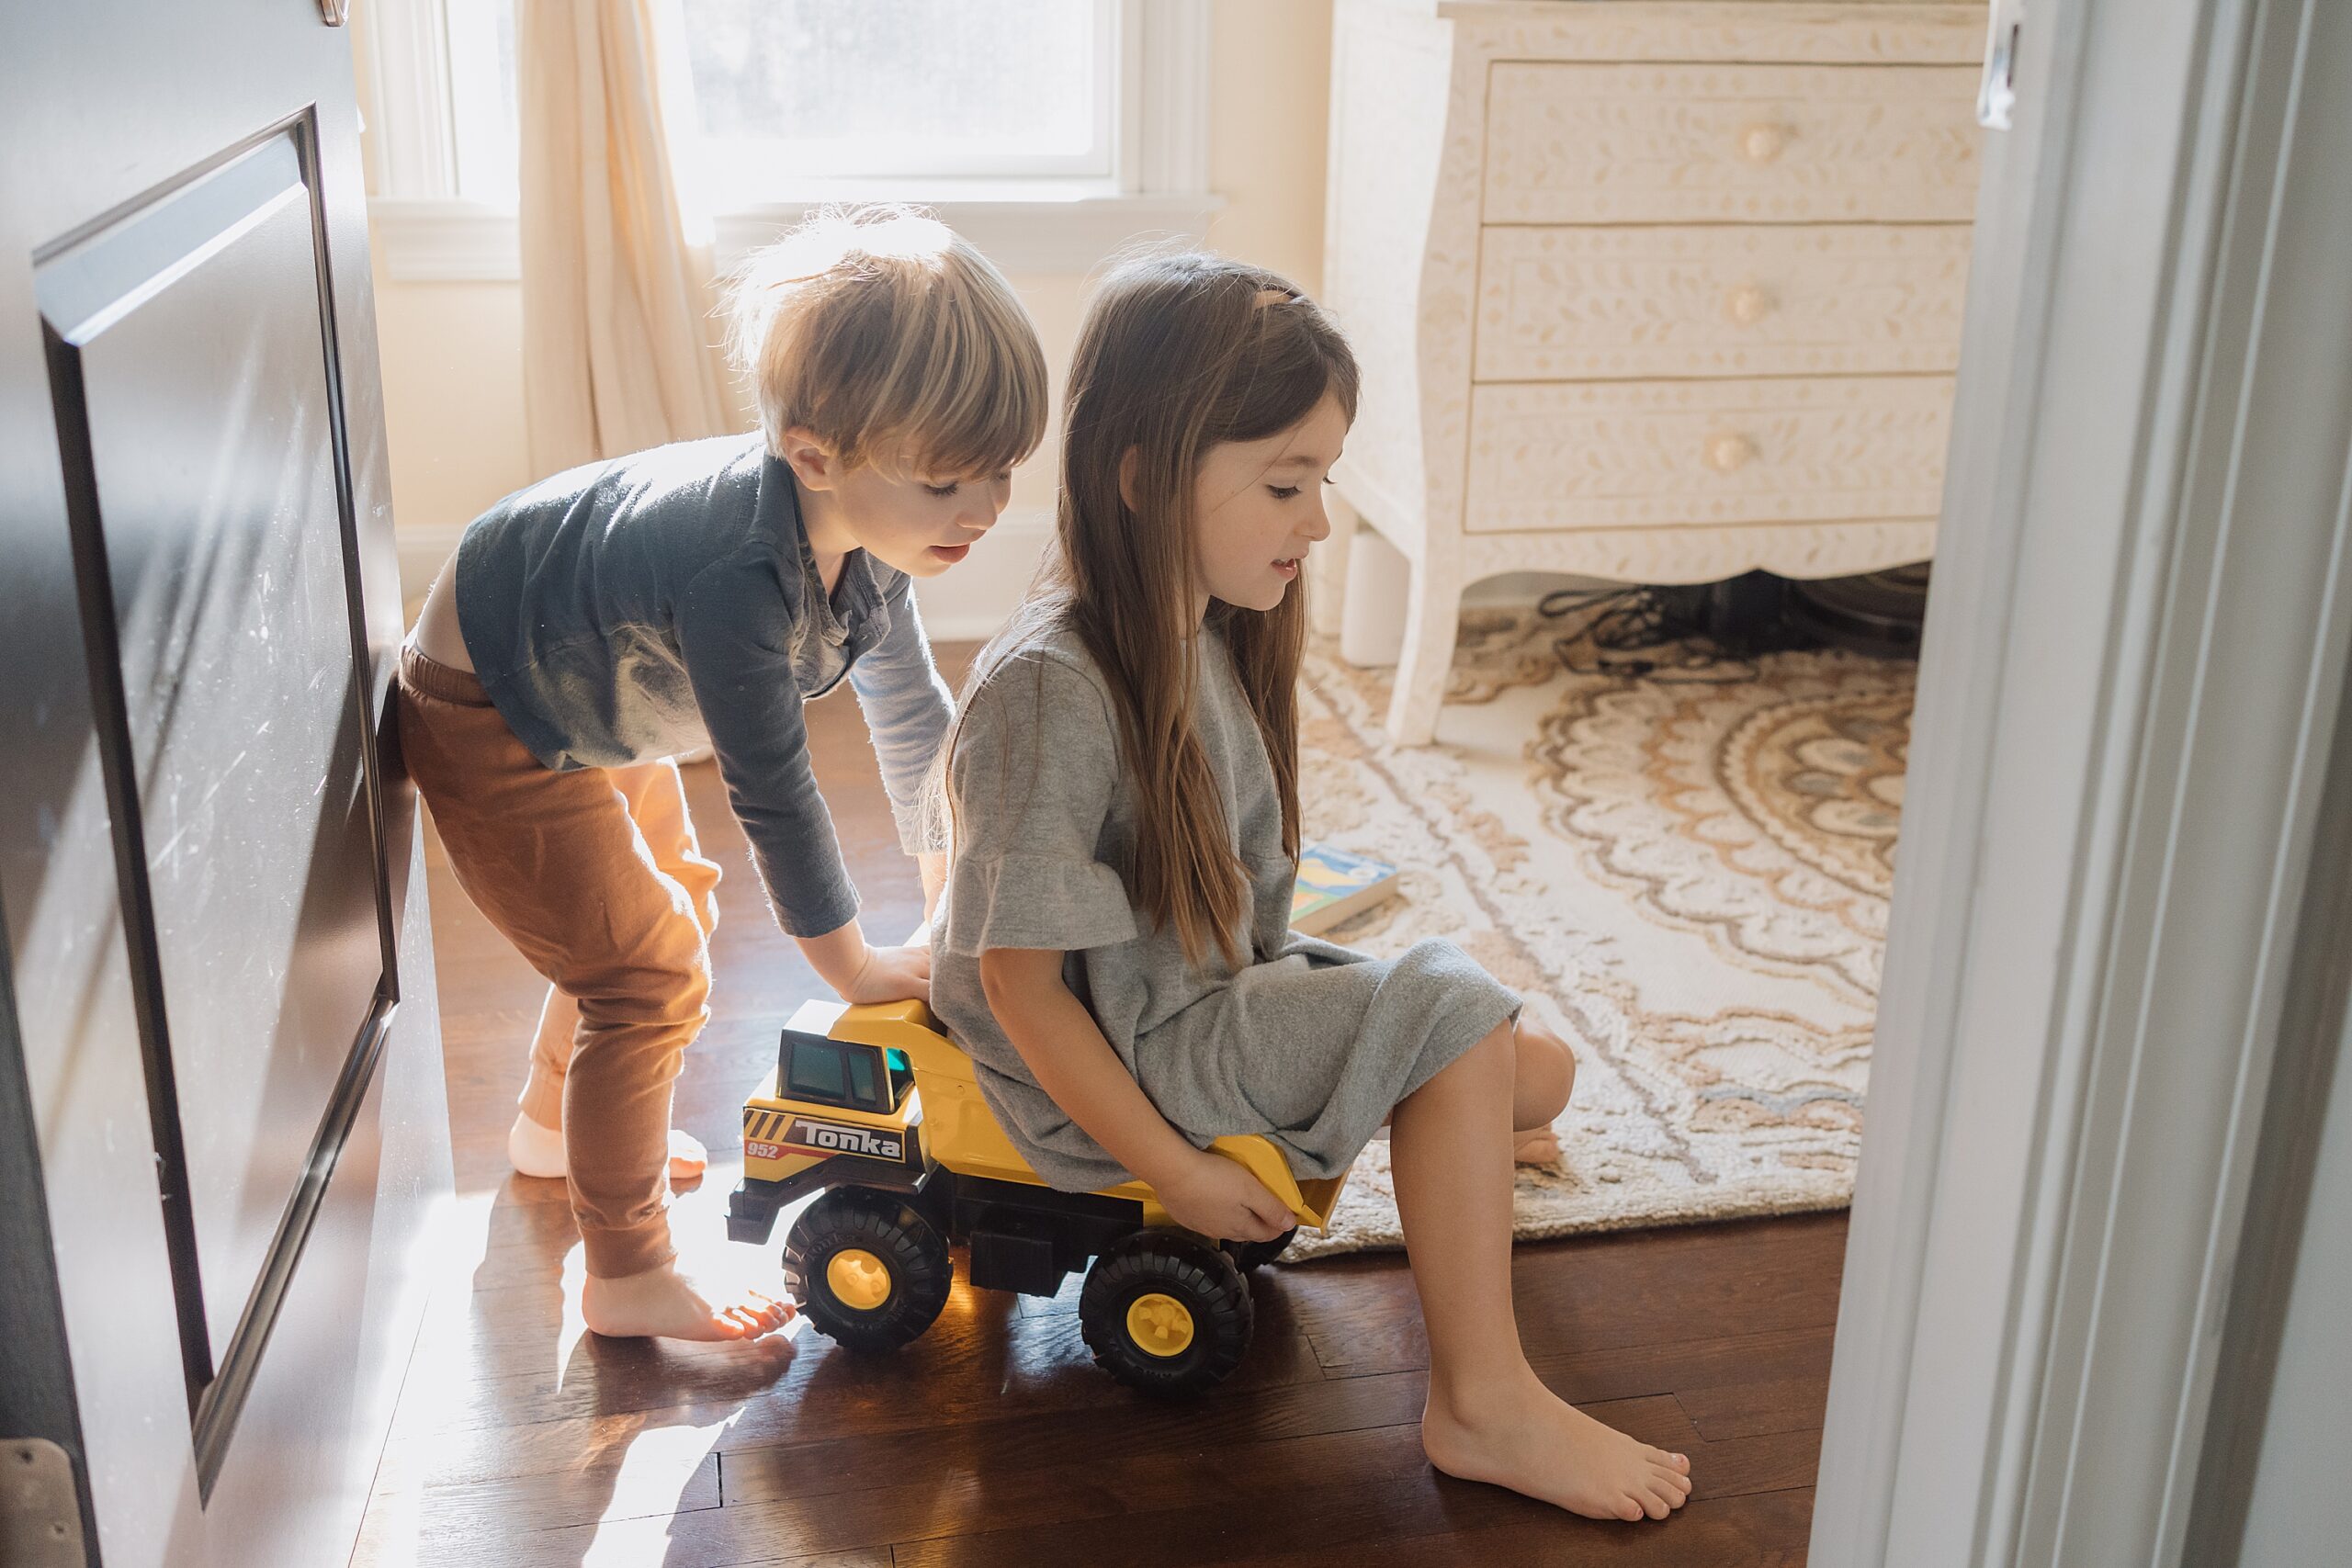 Two children playing indoors with a toy truck by a sunny window.